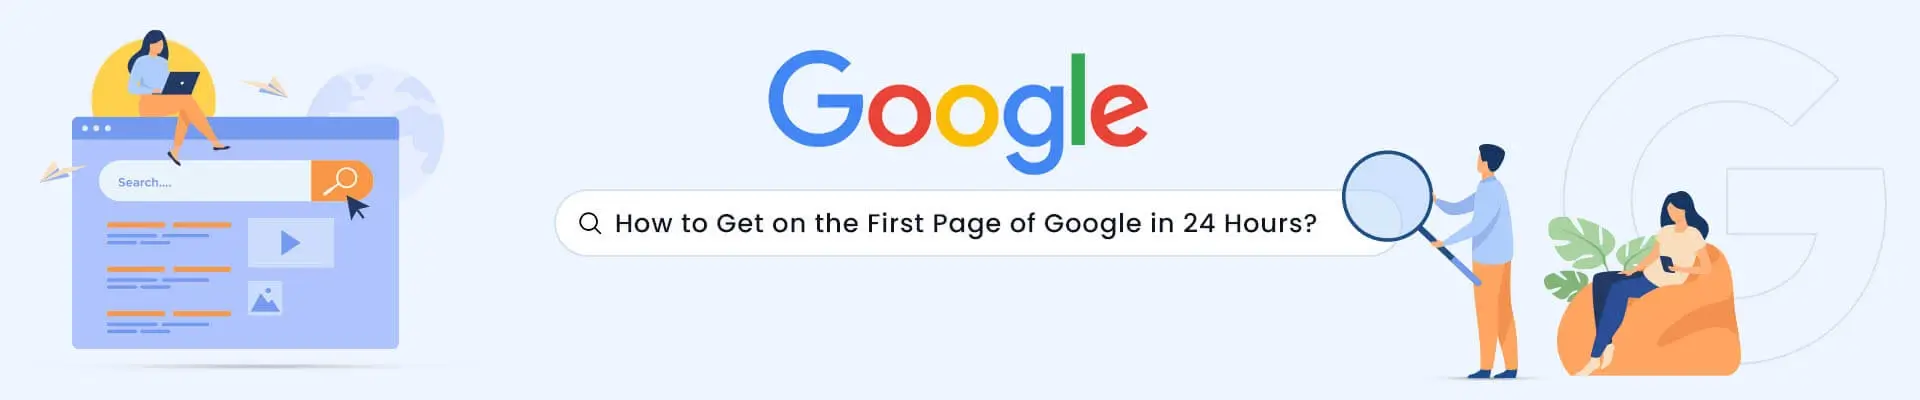 How to Rank on the First Page of Google in 24 Hours?